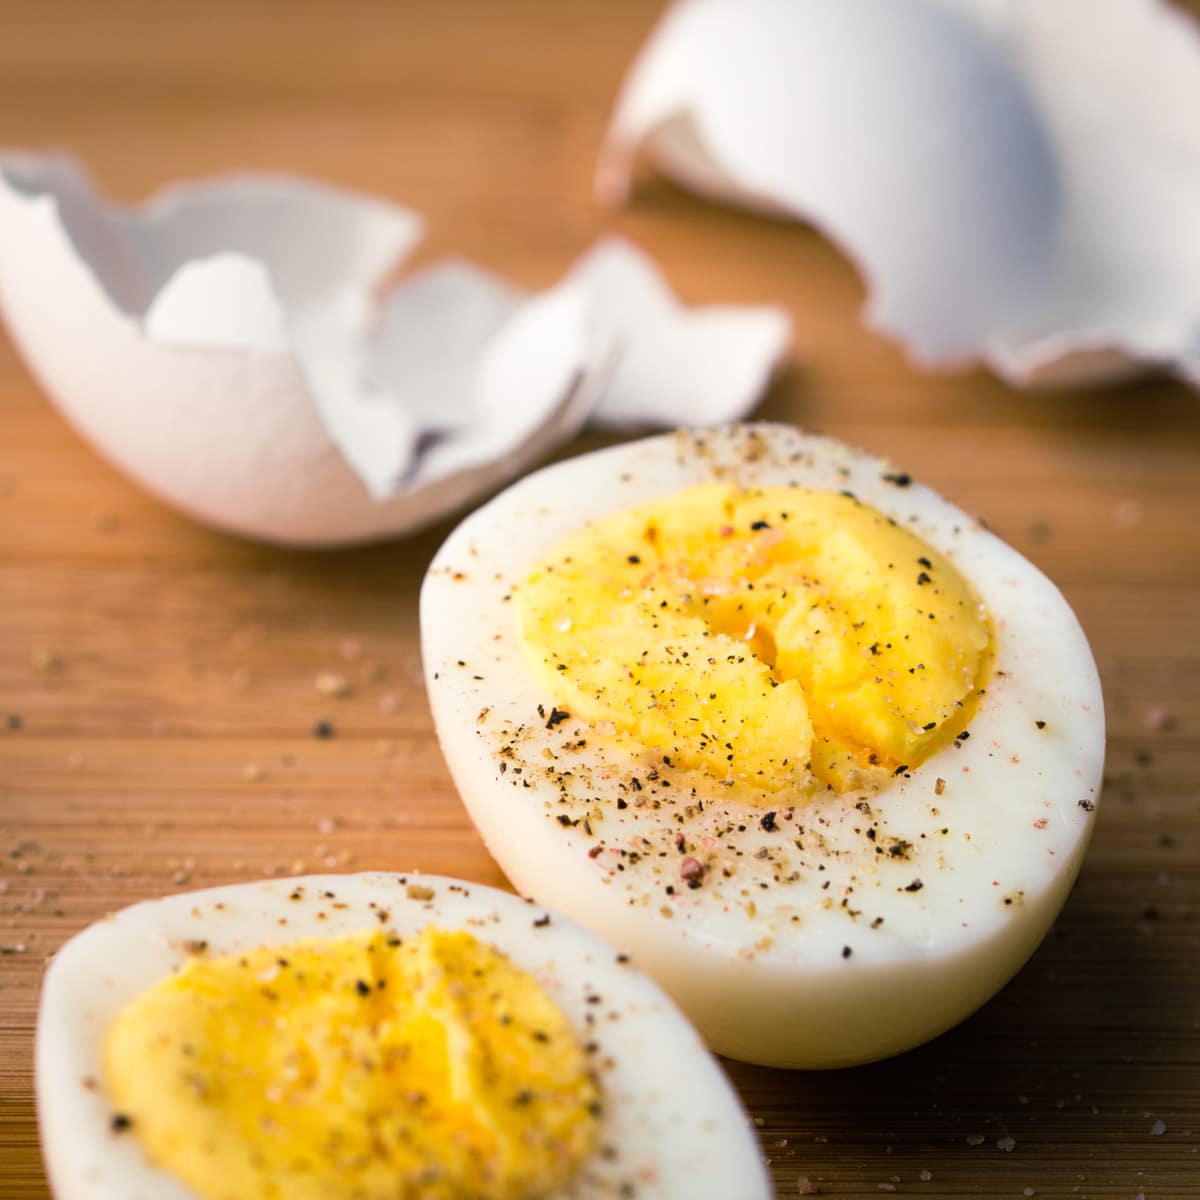 https://wecountcarbs.com/wp-content/uploads/2022/05/Steamed-hard-boiled-eggs-featured-image.jpg